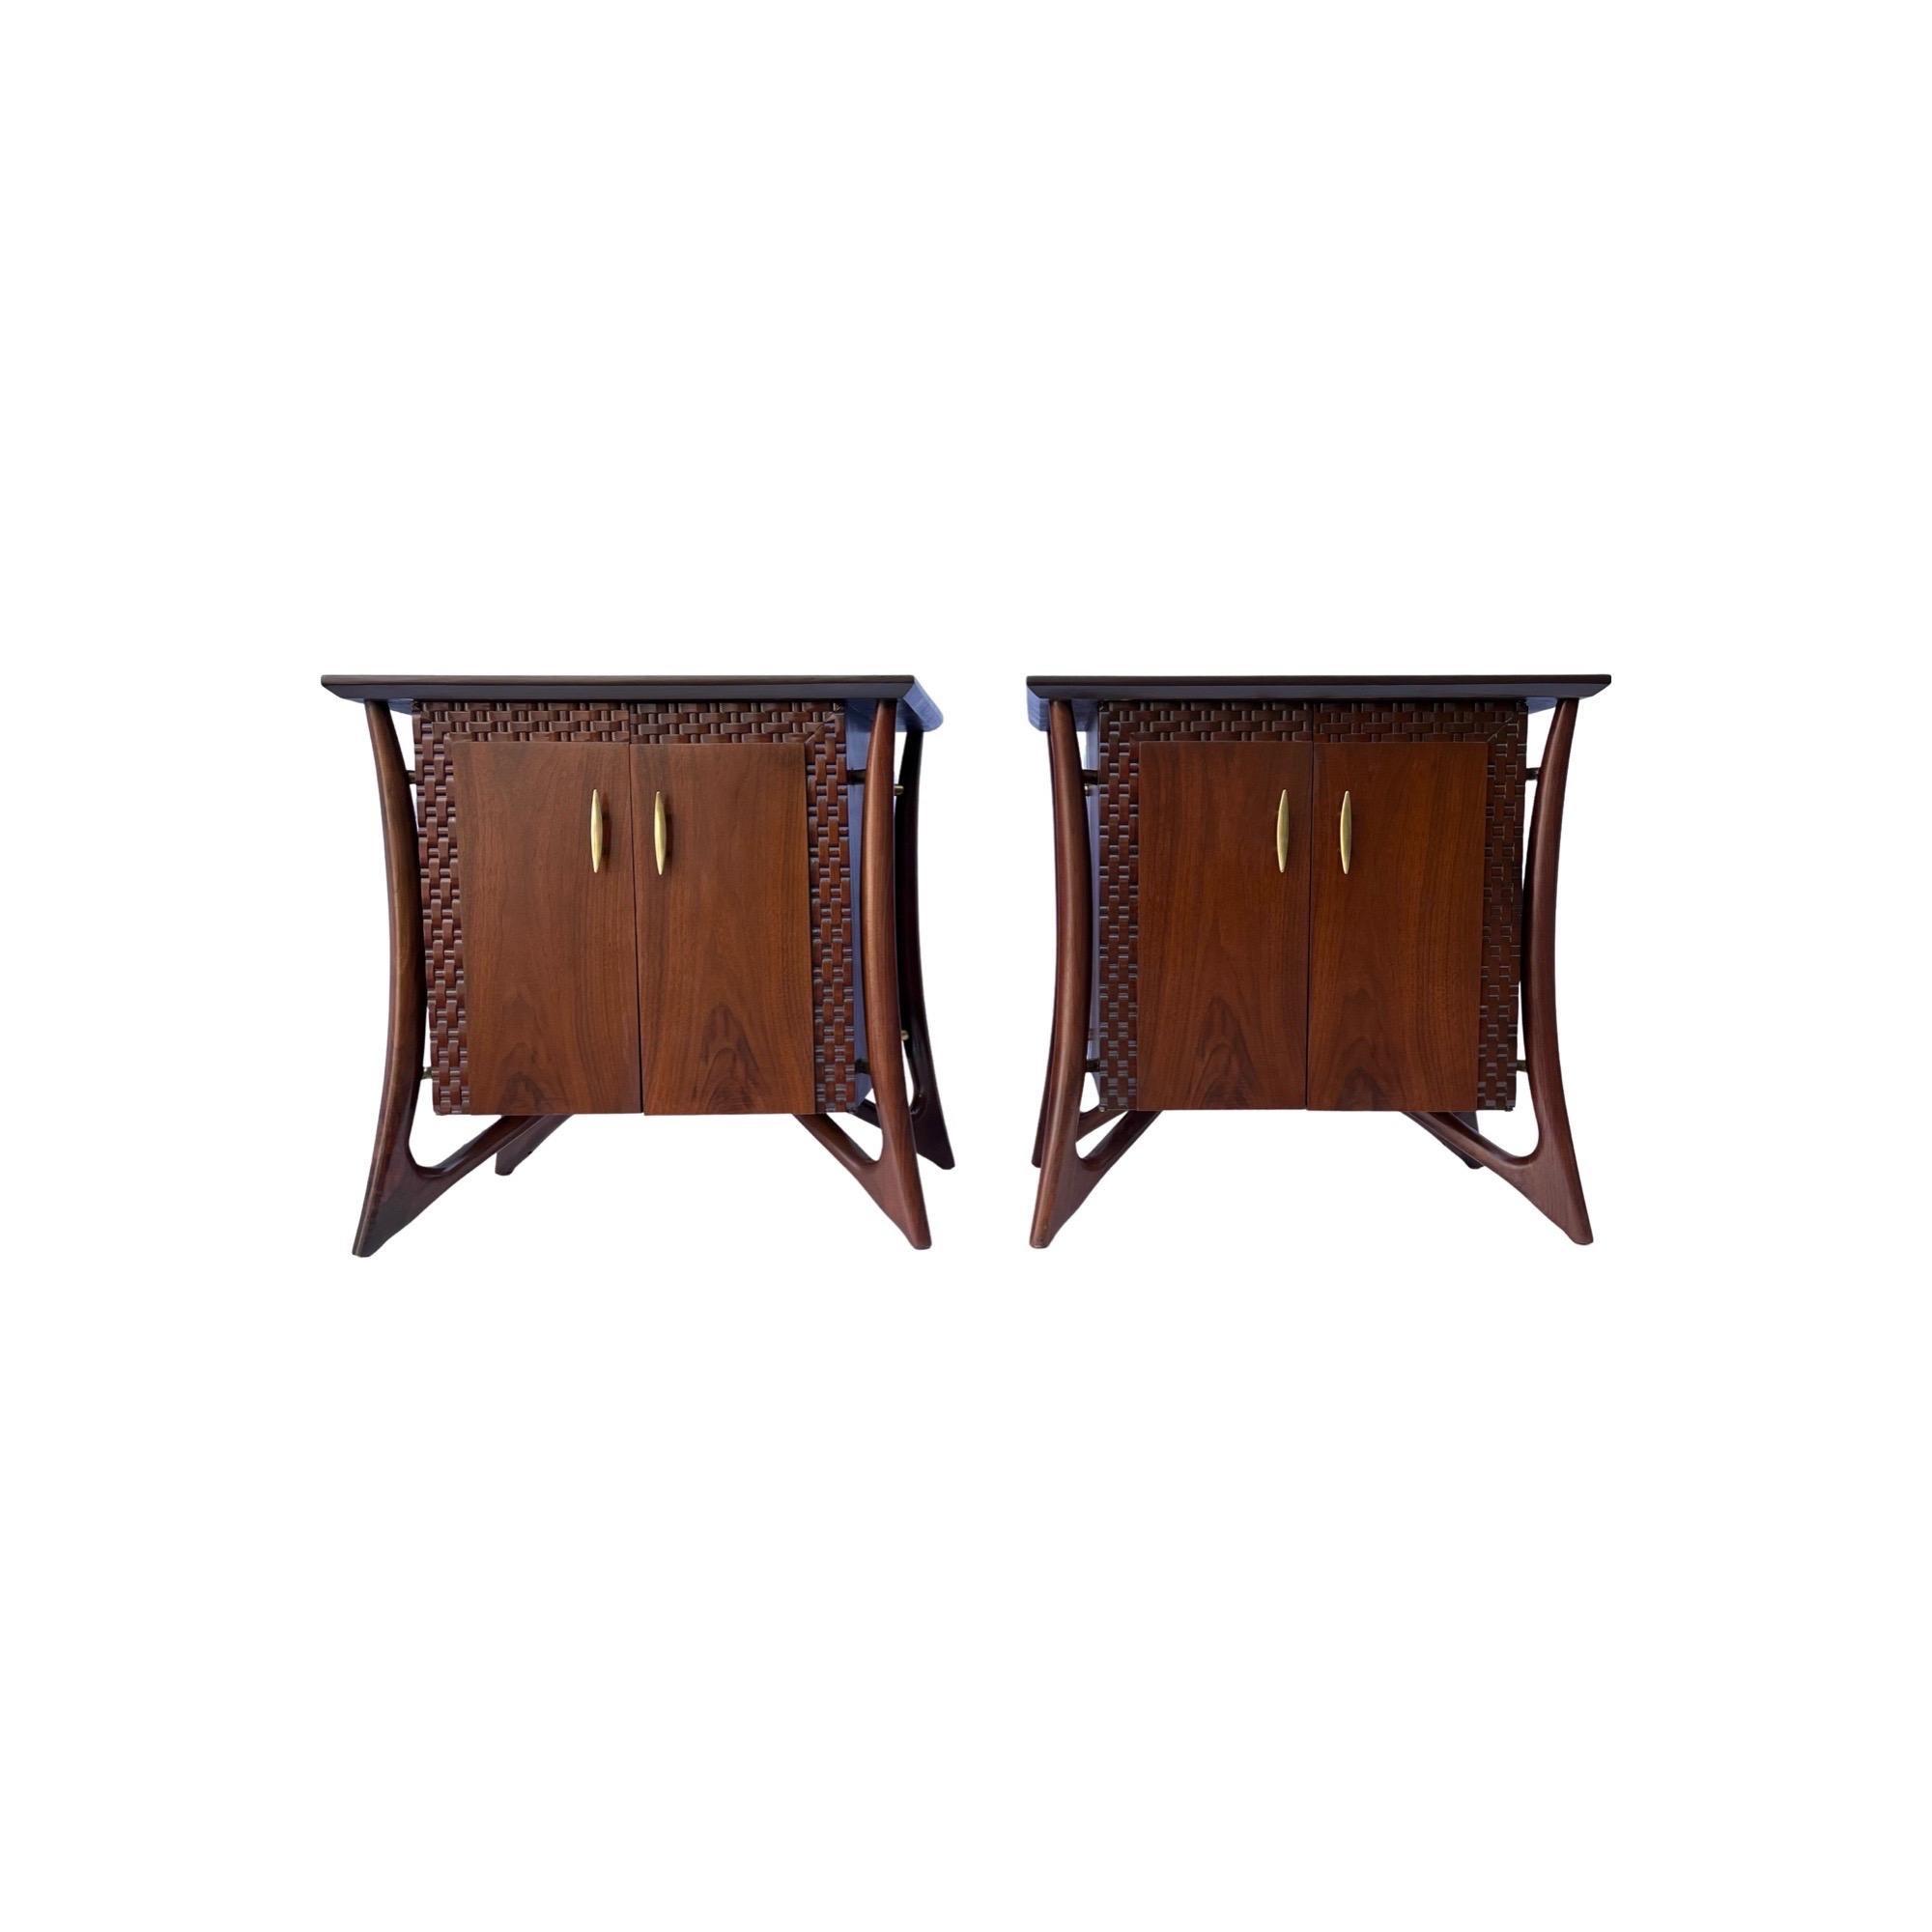 Introducing a captivating pair of mid-century modern nightstands from the renowned designer Piet Hein's collection. Crafted with meticulous attention to detail, these stunning walnut and brass nightstands exude timeless elegance. Featuring a